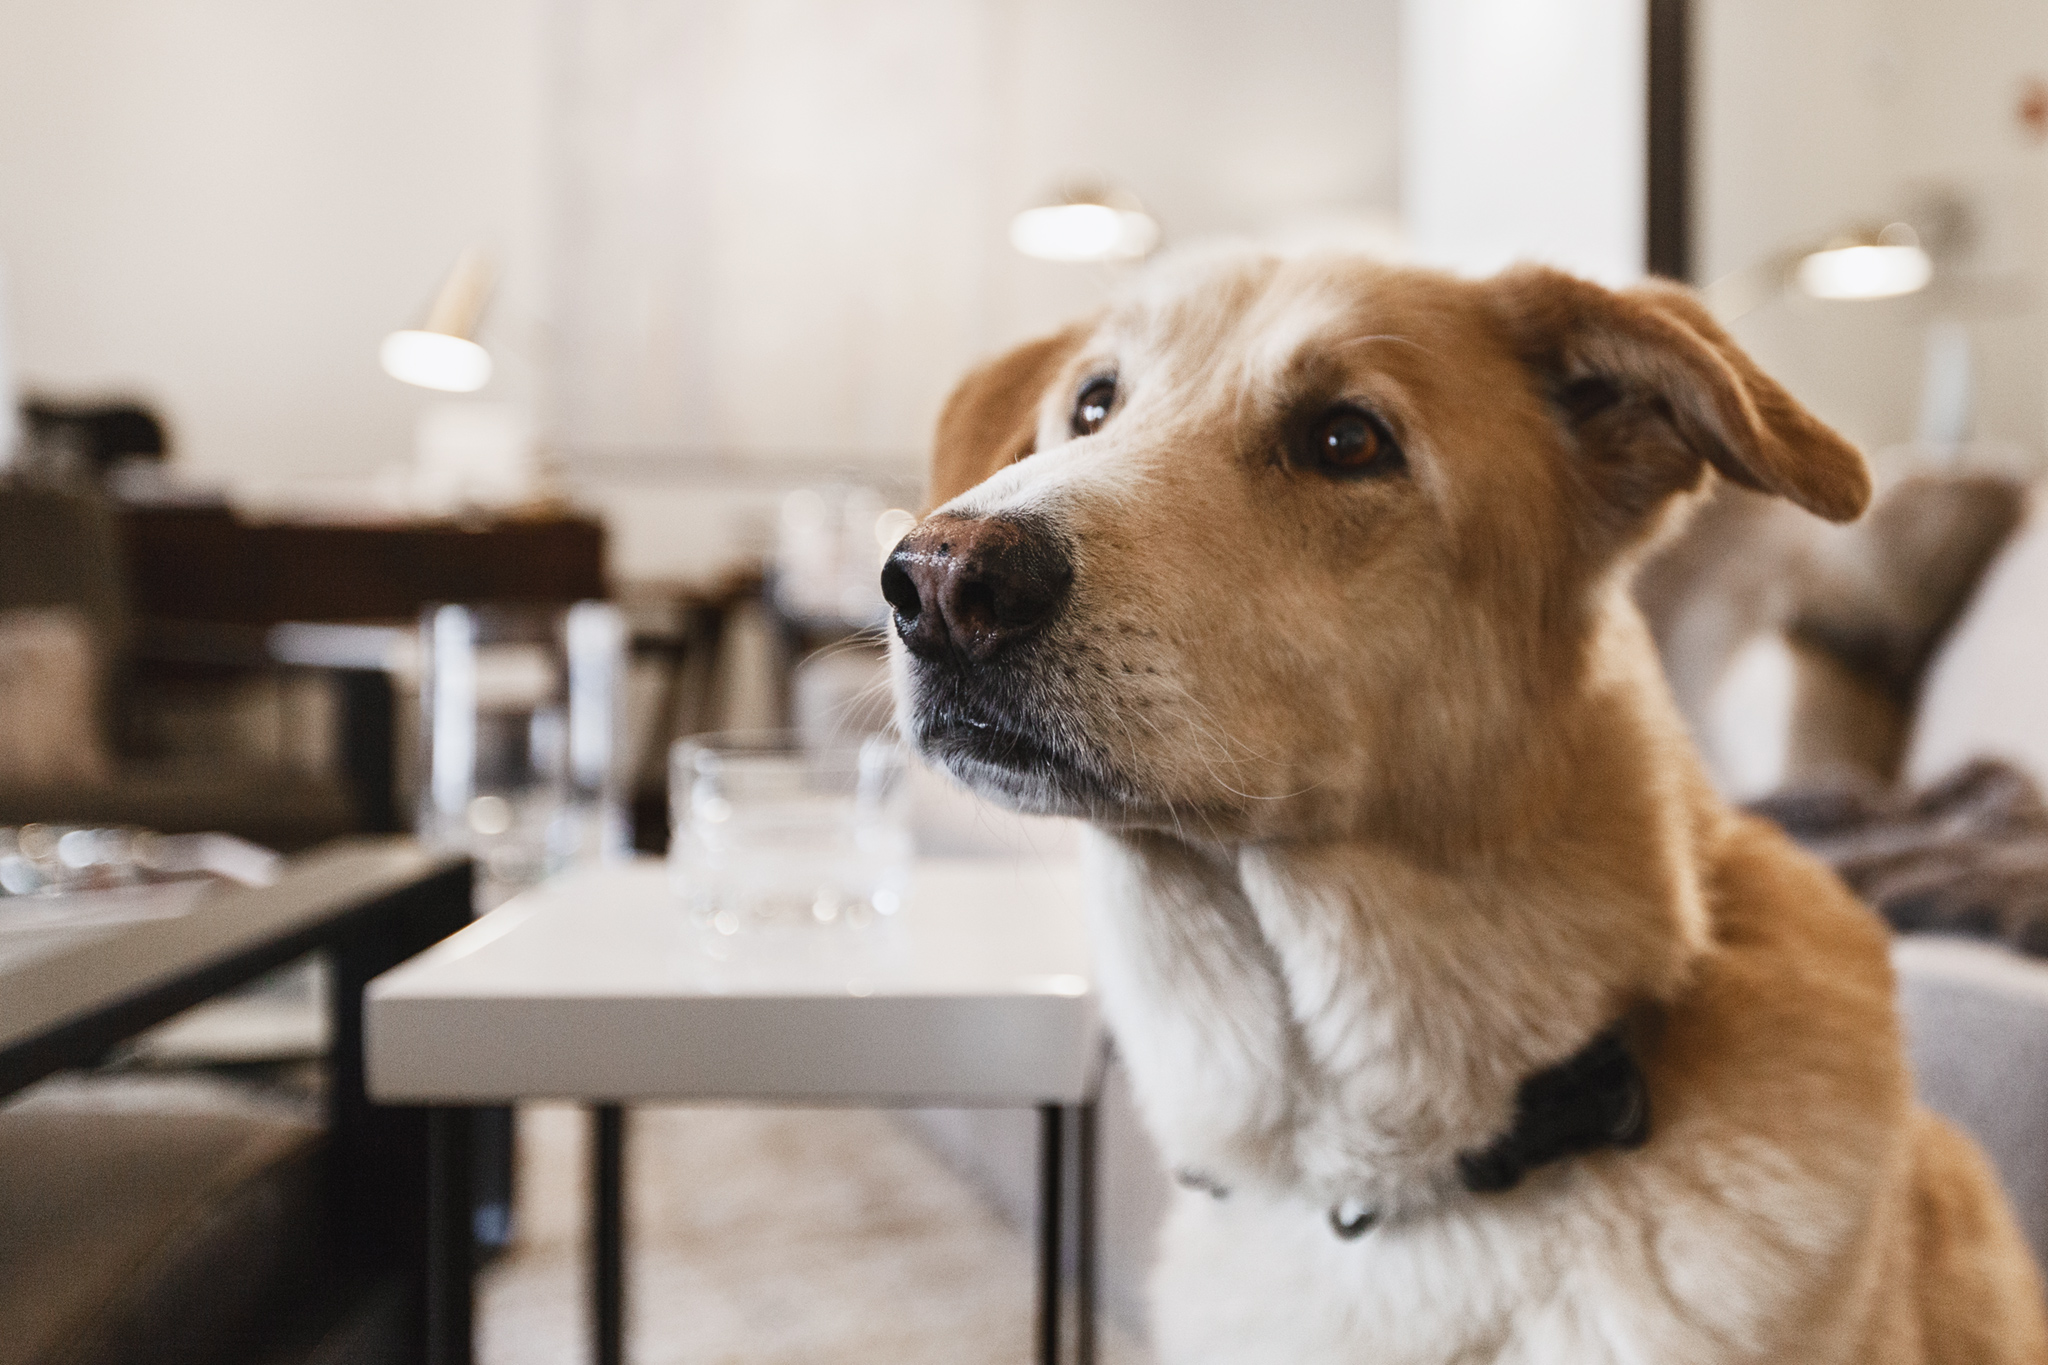 Buddy, the dog with a penchant for fine fabrics, a new addition to the WRJ Design team, merited a Hunt X Gather post that also spread the word about a worthy Jackson nonprofit’s canine adoption event.